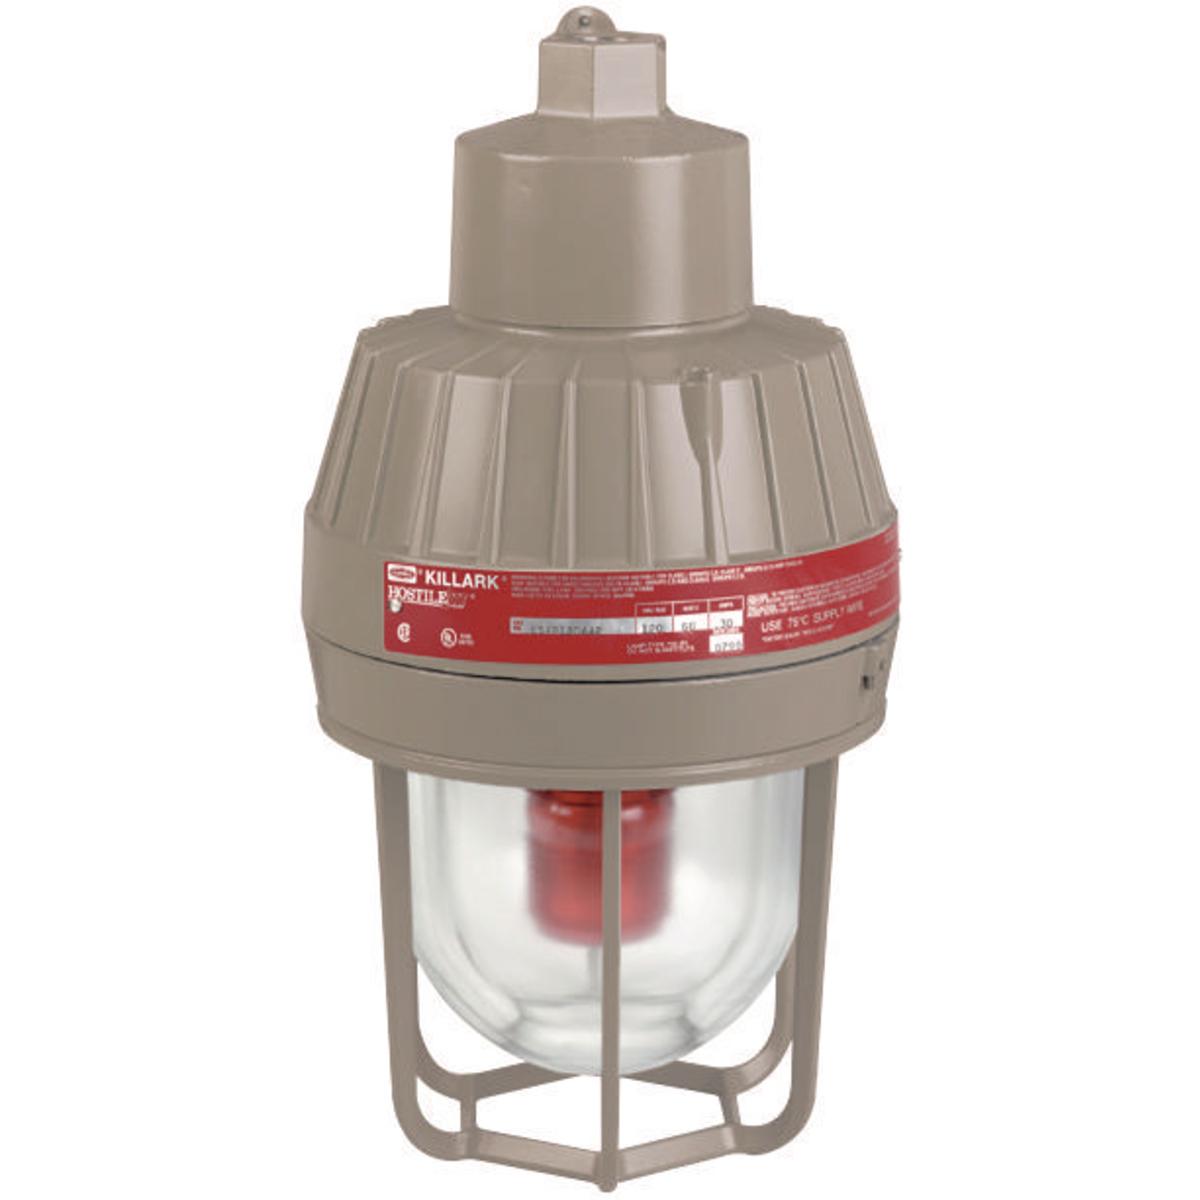 Hubbell ESXR120AA3 120V Red Strobe, 1" Pendant  ; Electronic component temperature range –40˚C to +55˚C ; NEC temperature code, T6 ( ; Flash rate–85 flashes per minute ; Xenon type lamp ; Voltage and amperage: 12-74 VDC: Draws 1.25A avg. @ 12 VDC tapering to 0.2A avg. @ 74 